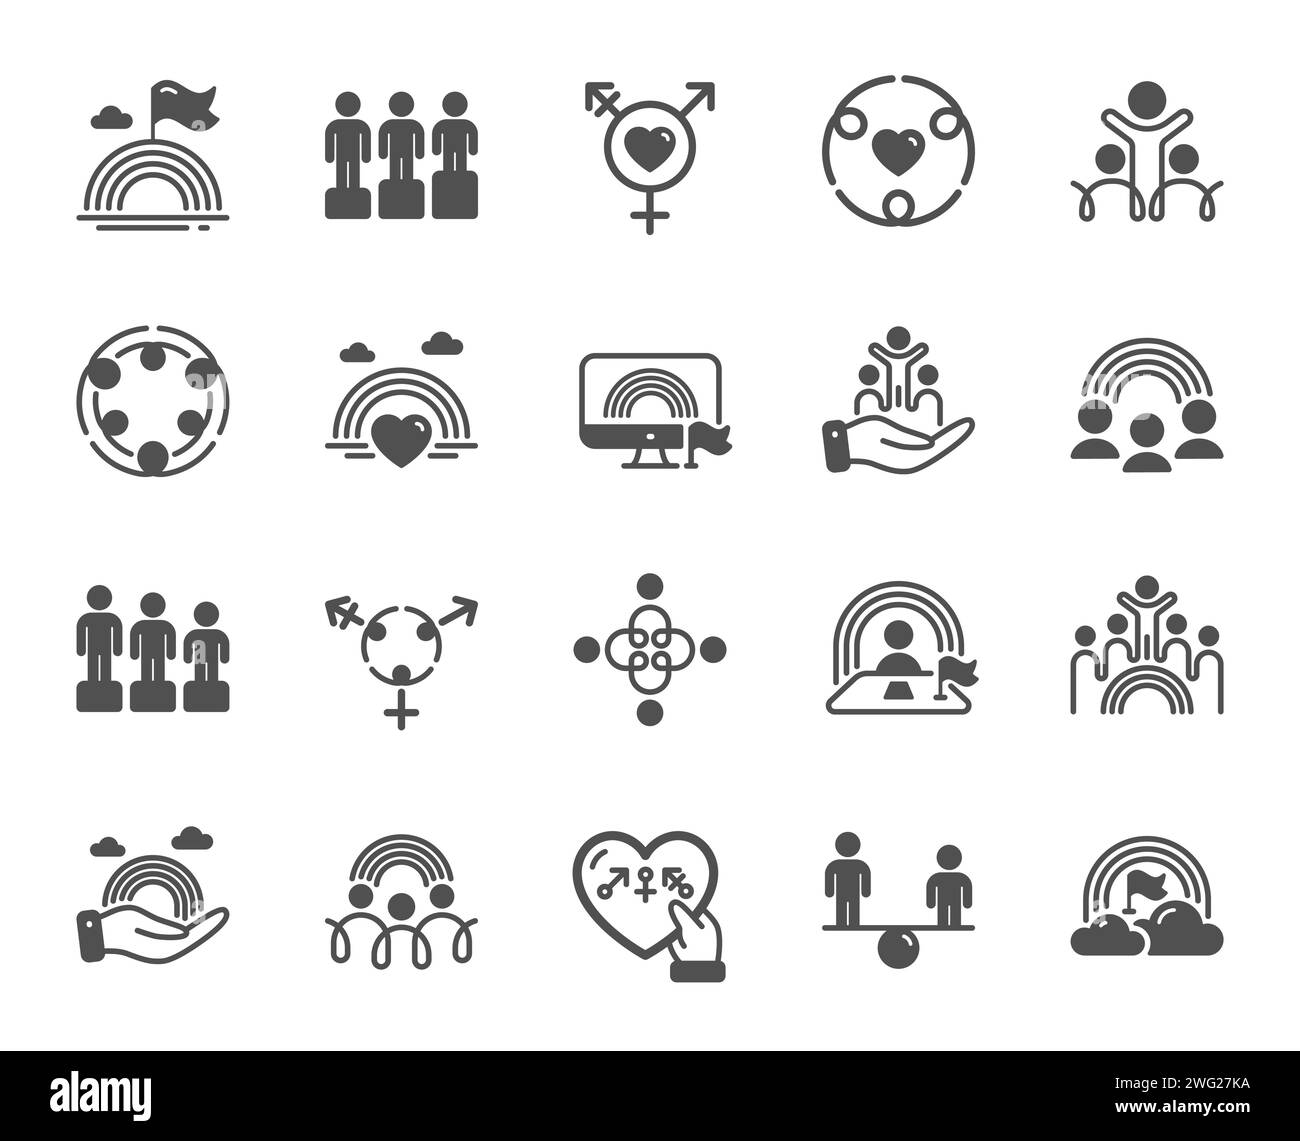 Equality, Equity and Diversity icons. LGBT rights, Equal opportunities and respective needs icons. Vector Stock Vector